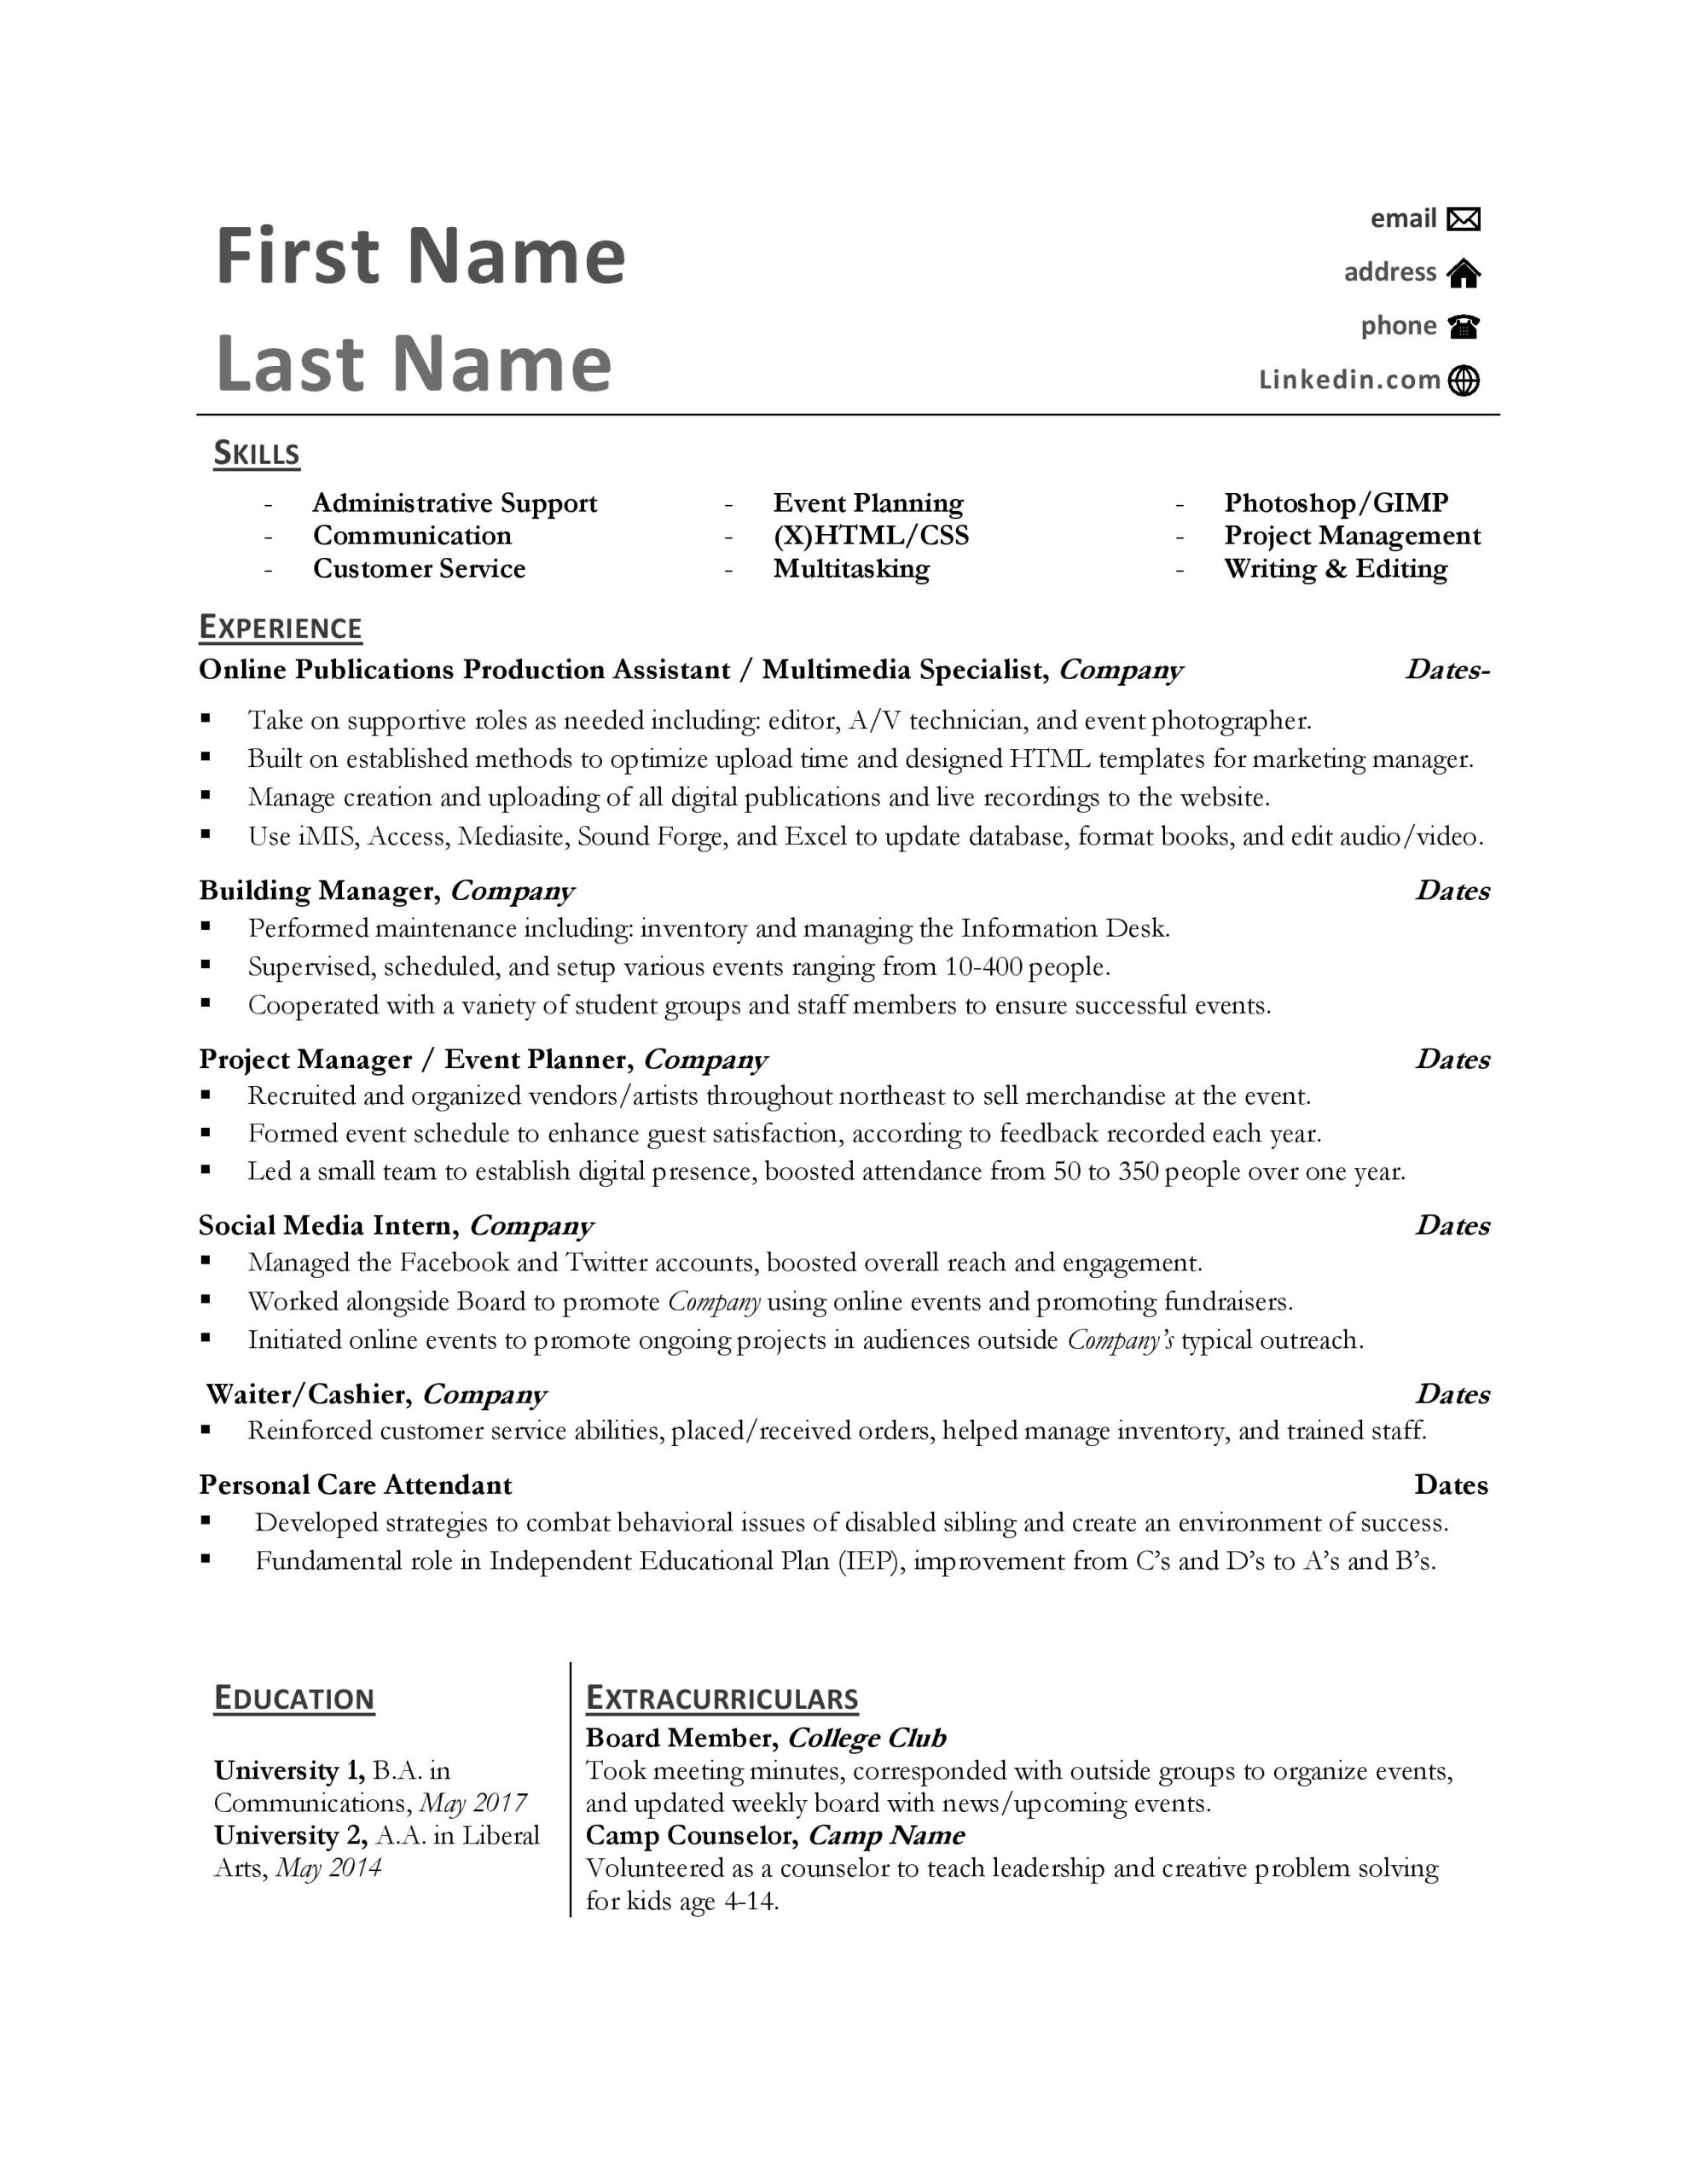 Sample Resume with One Company Multiple Positions Help A Recent Grad with An Awkward Resume. Also, Advice for Best …